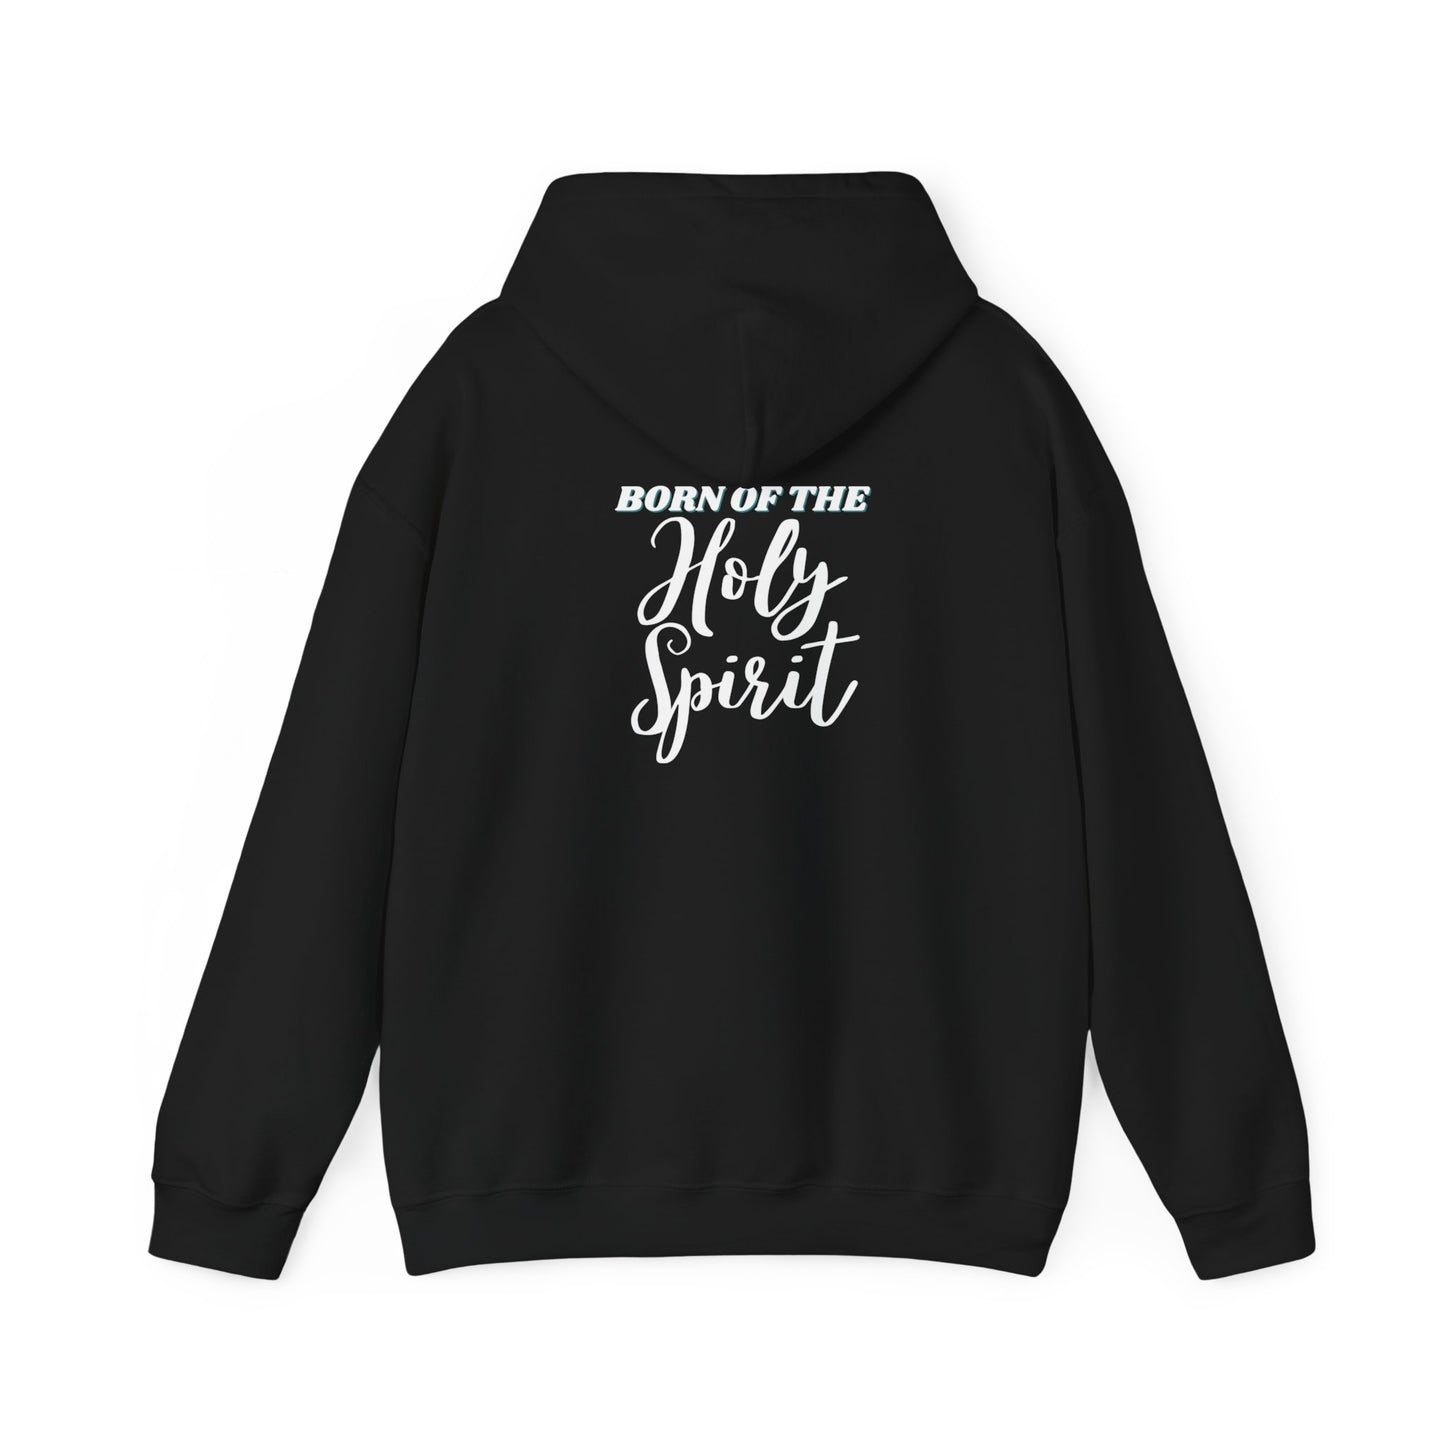 Born of Fire and Water/ Born of the Holy Spirit Unisex Heavy Blend™ Hooded Sweatshirt